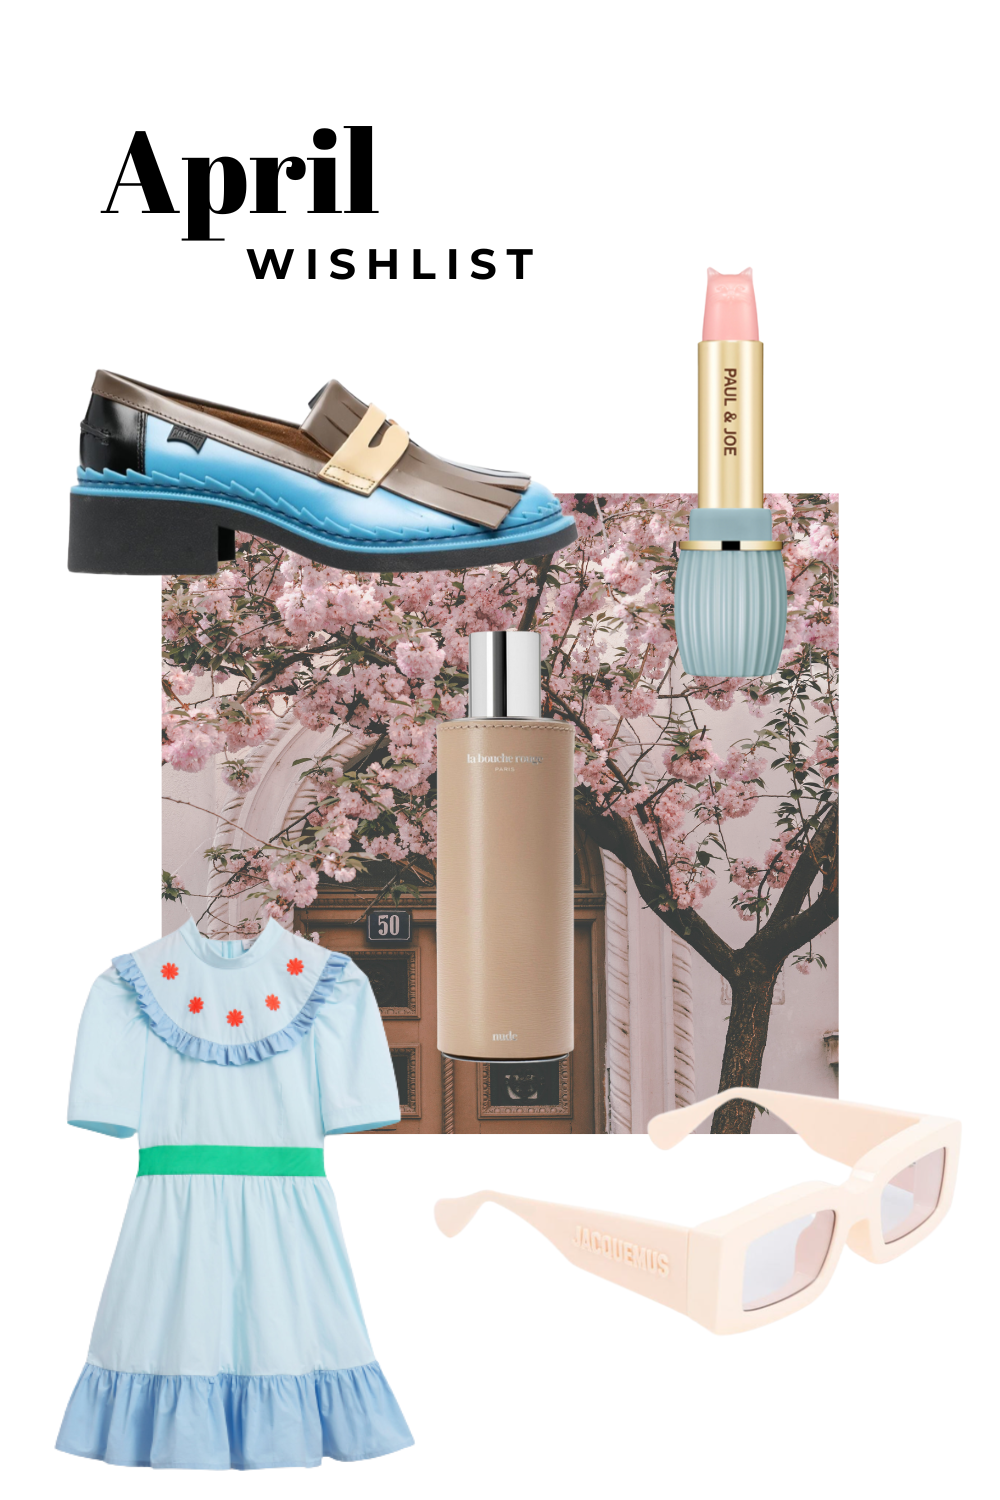 A collage of shoes, a dress, sunglasses, perfume and lipstick